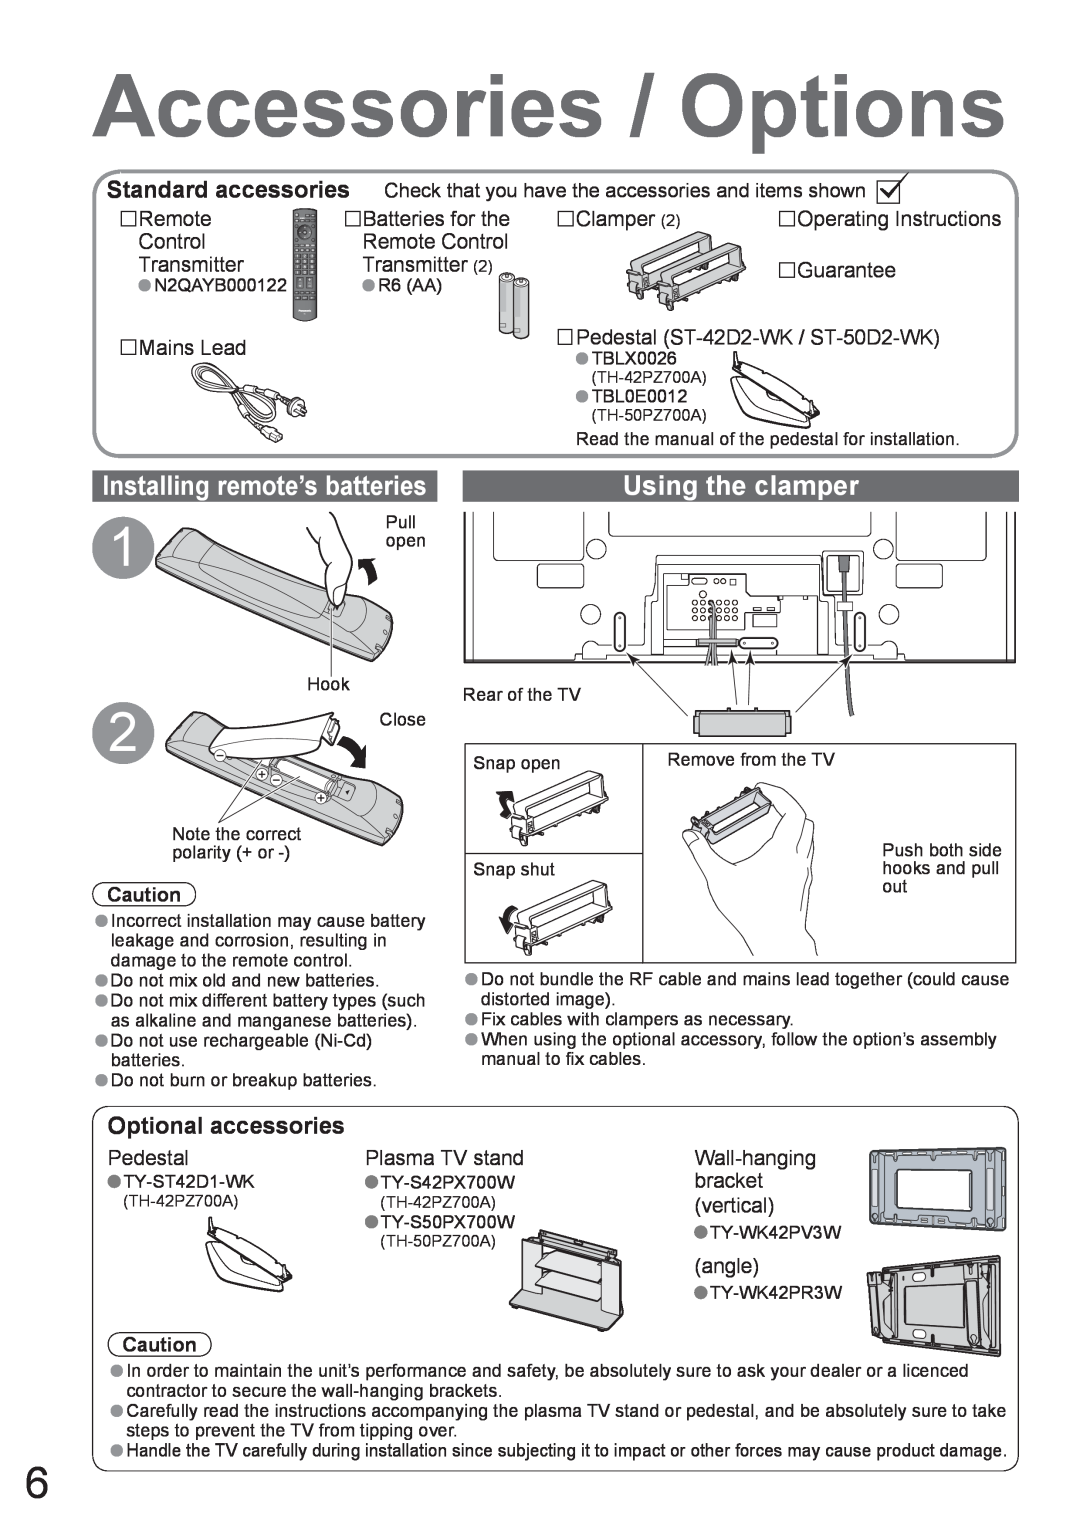 Panasonic TH-50PZ700A Accessories / Options, Installing remote’s batteries, Using the clamper, Optional accessories 